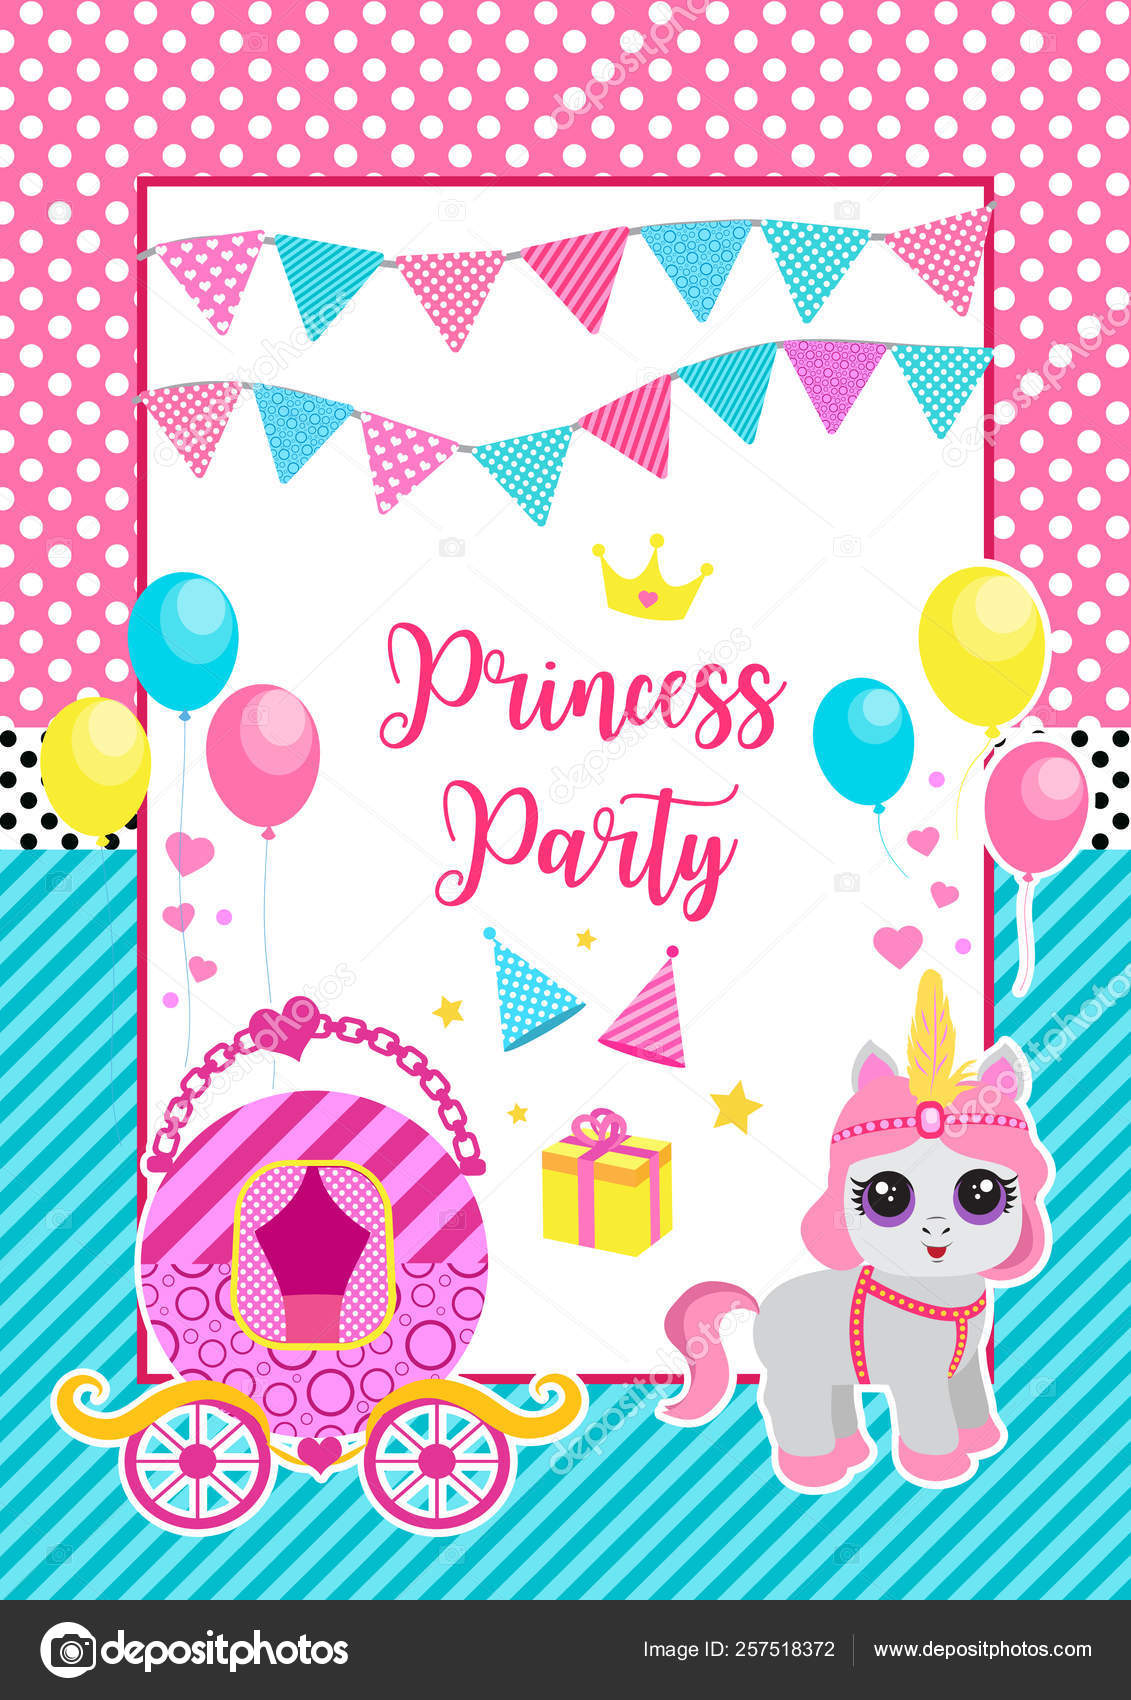 Happy Birthday Greeting Or Invitation Card For A Little Princess In Lol Doll Surprise Style Template For Your Design Pet Pony And Accessories Vector Illustration Stock Vector C Sonya92